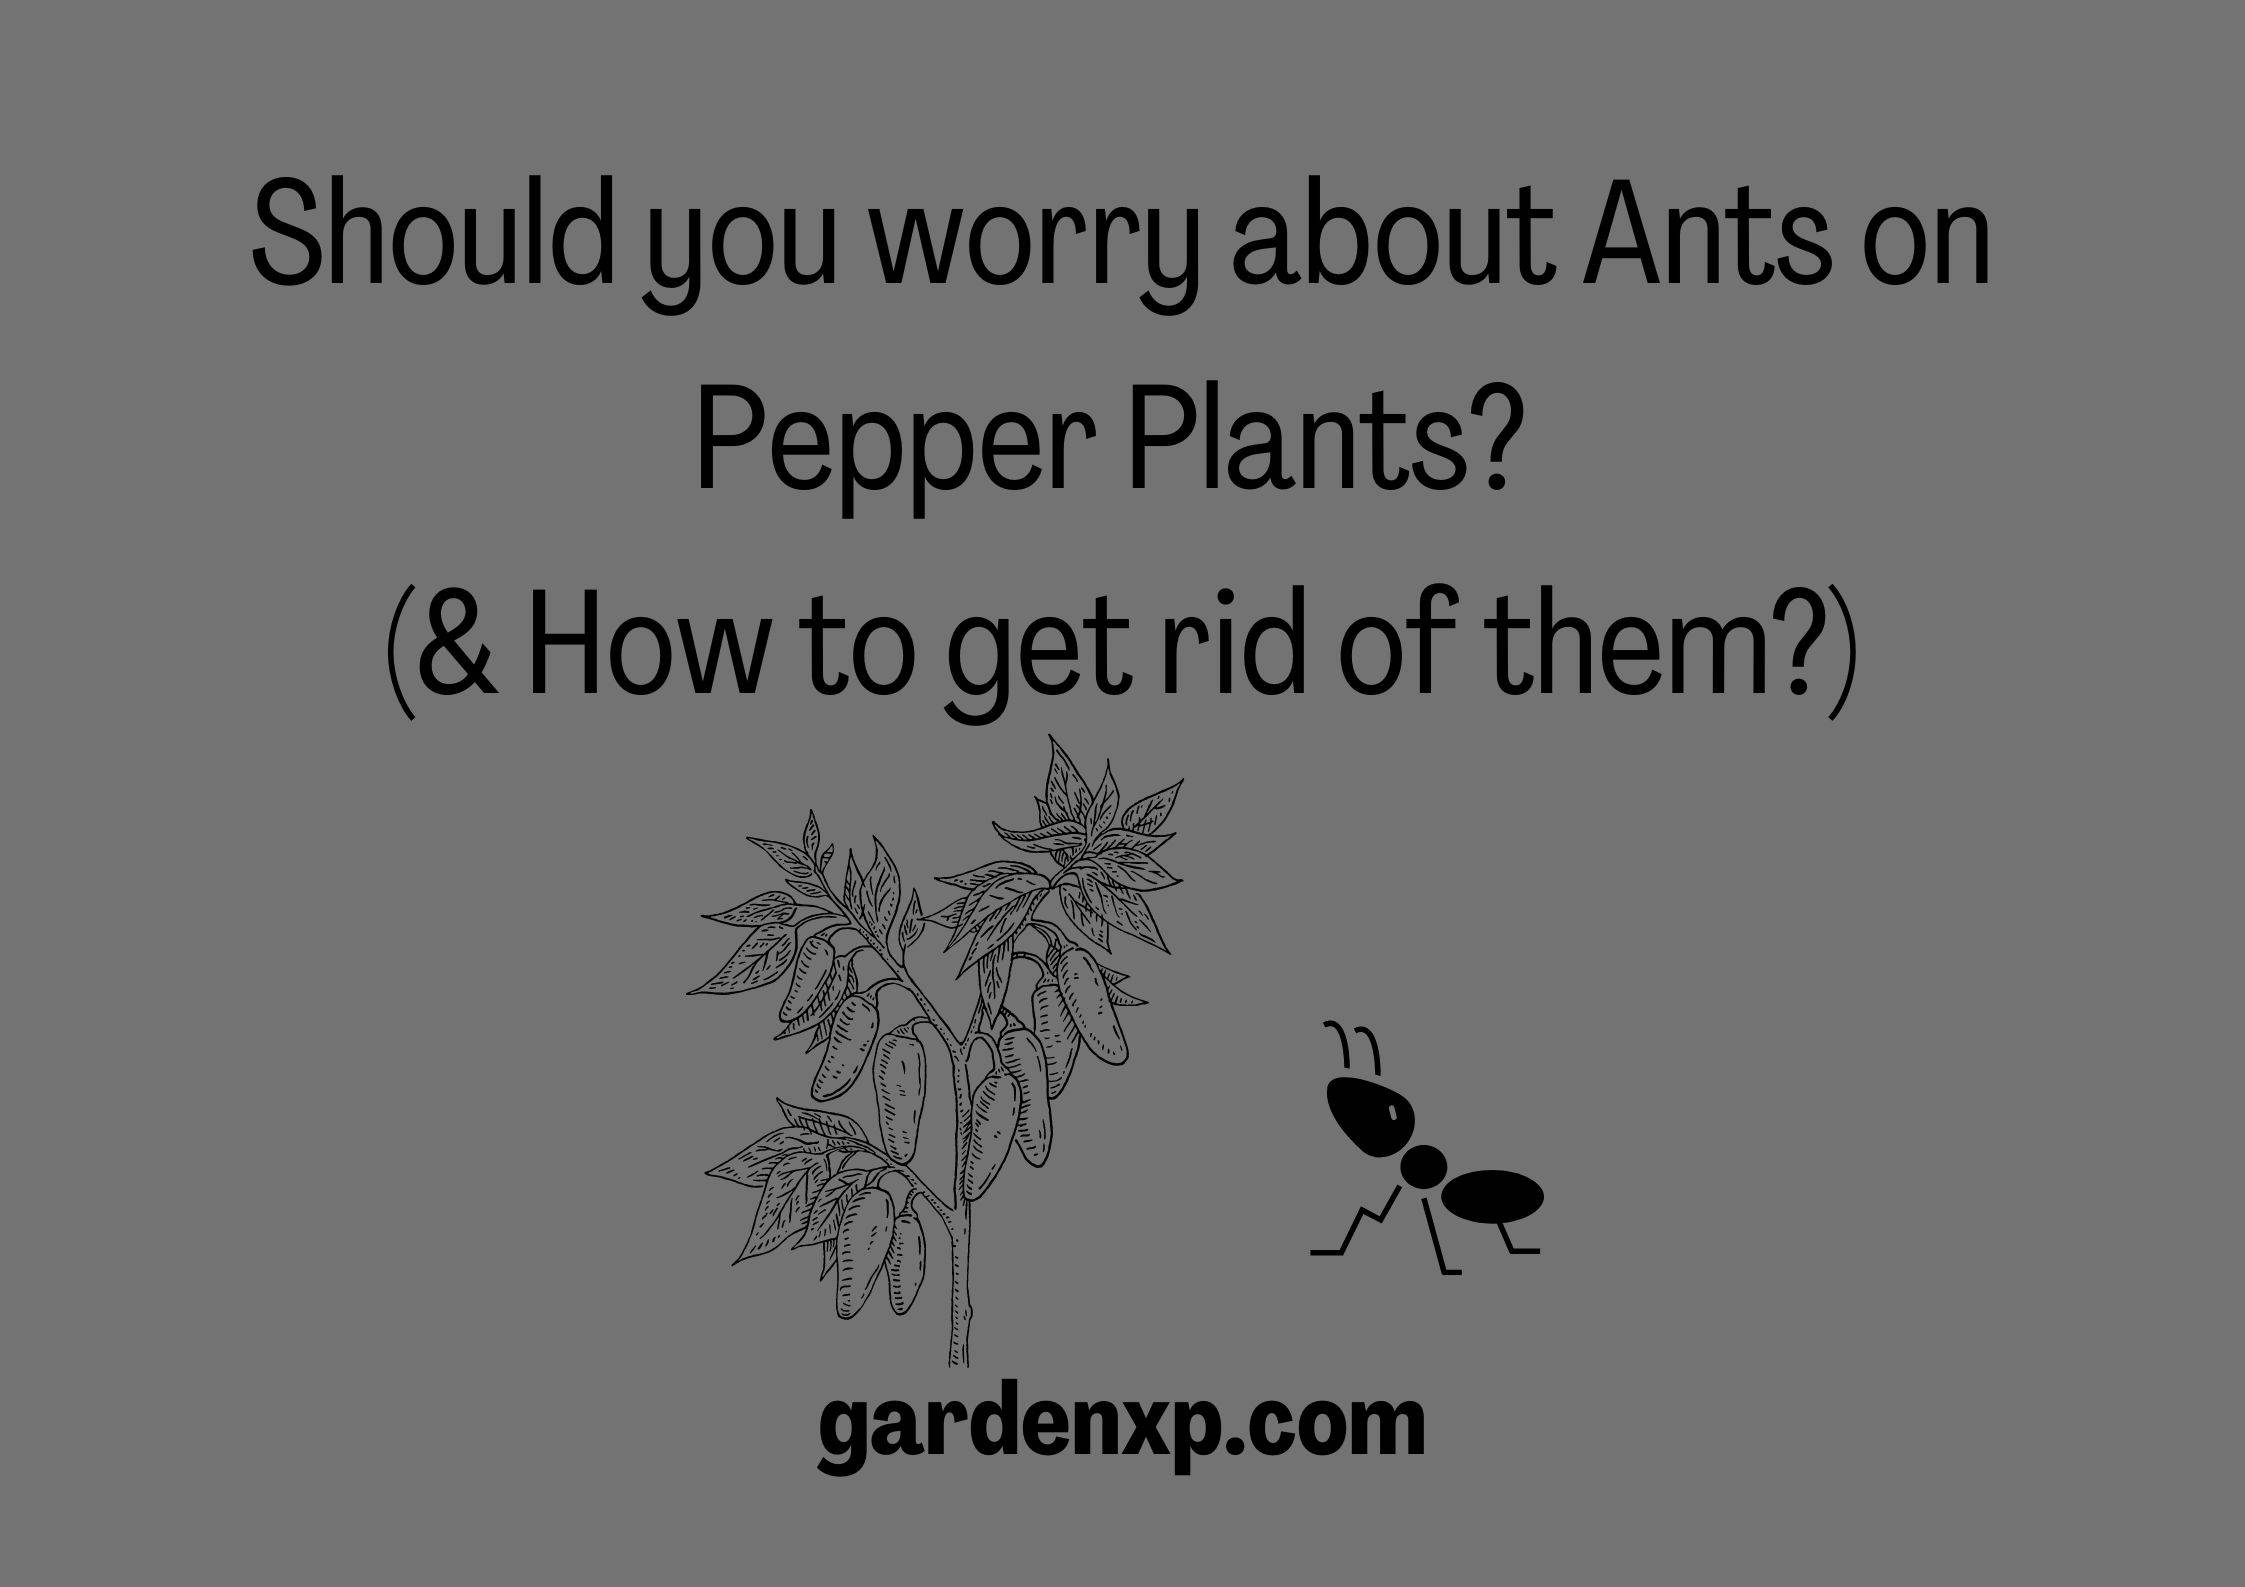 Should you worry about Ants on Pepper Plants? (& How to get rid of them?)